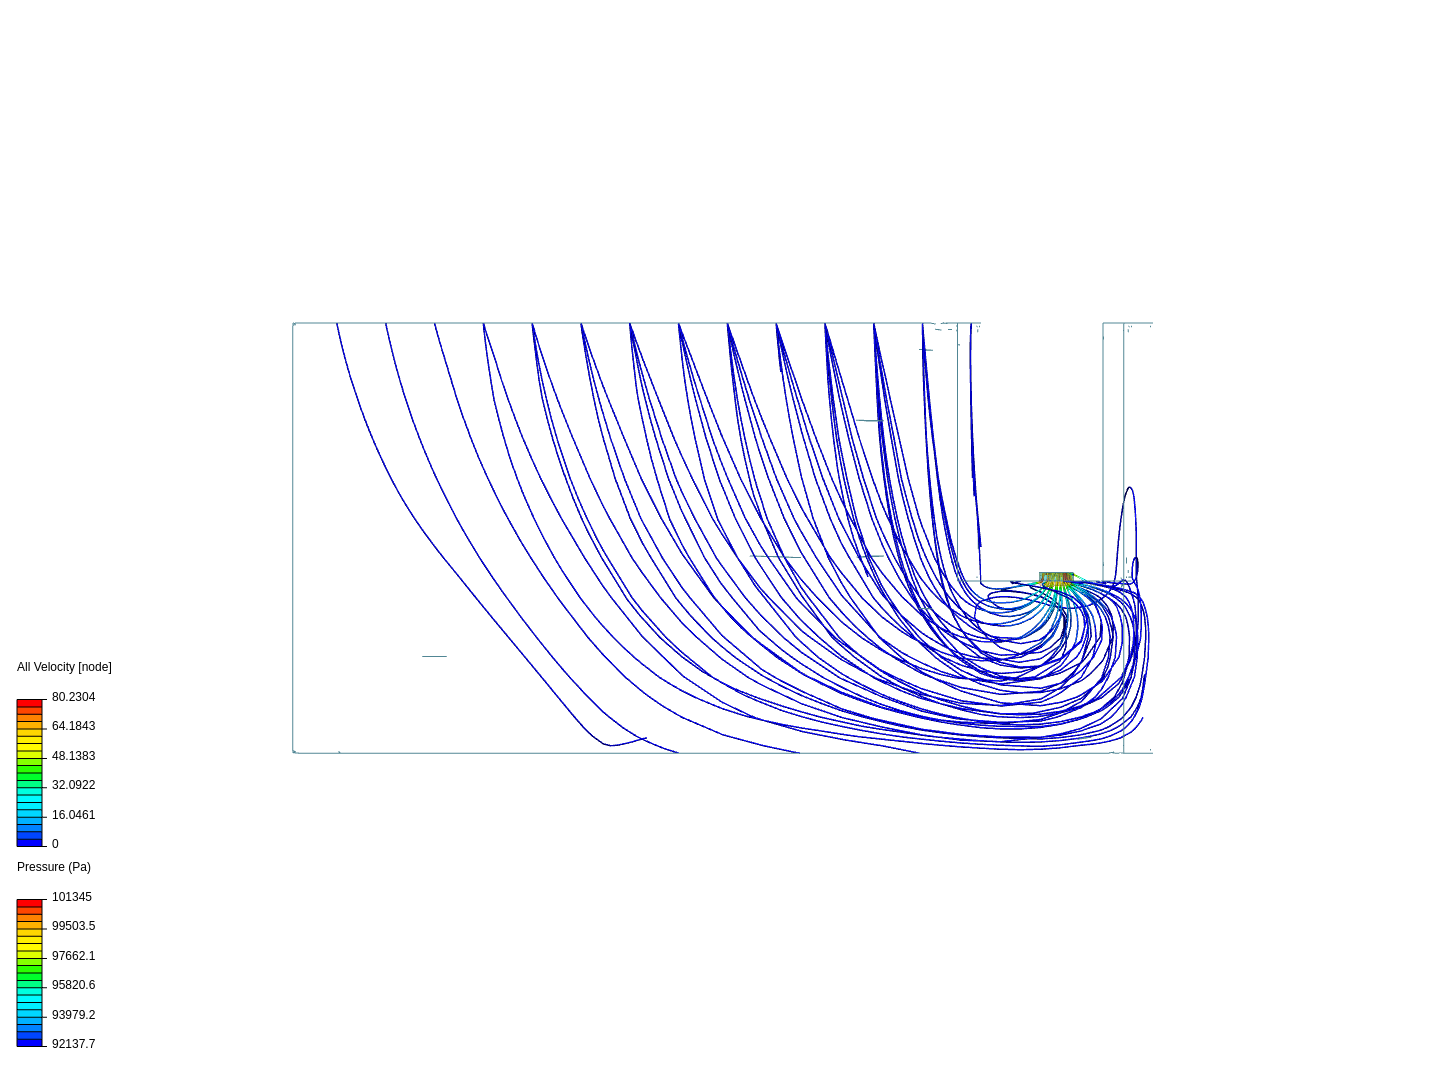 Ring_A_cfd image